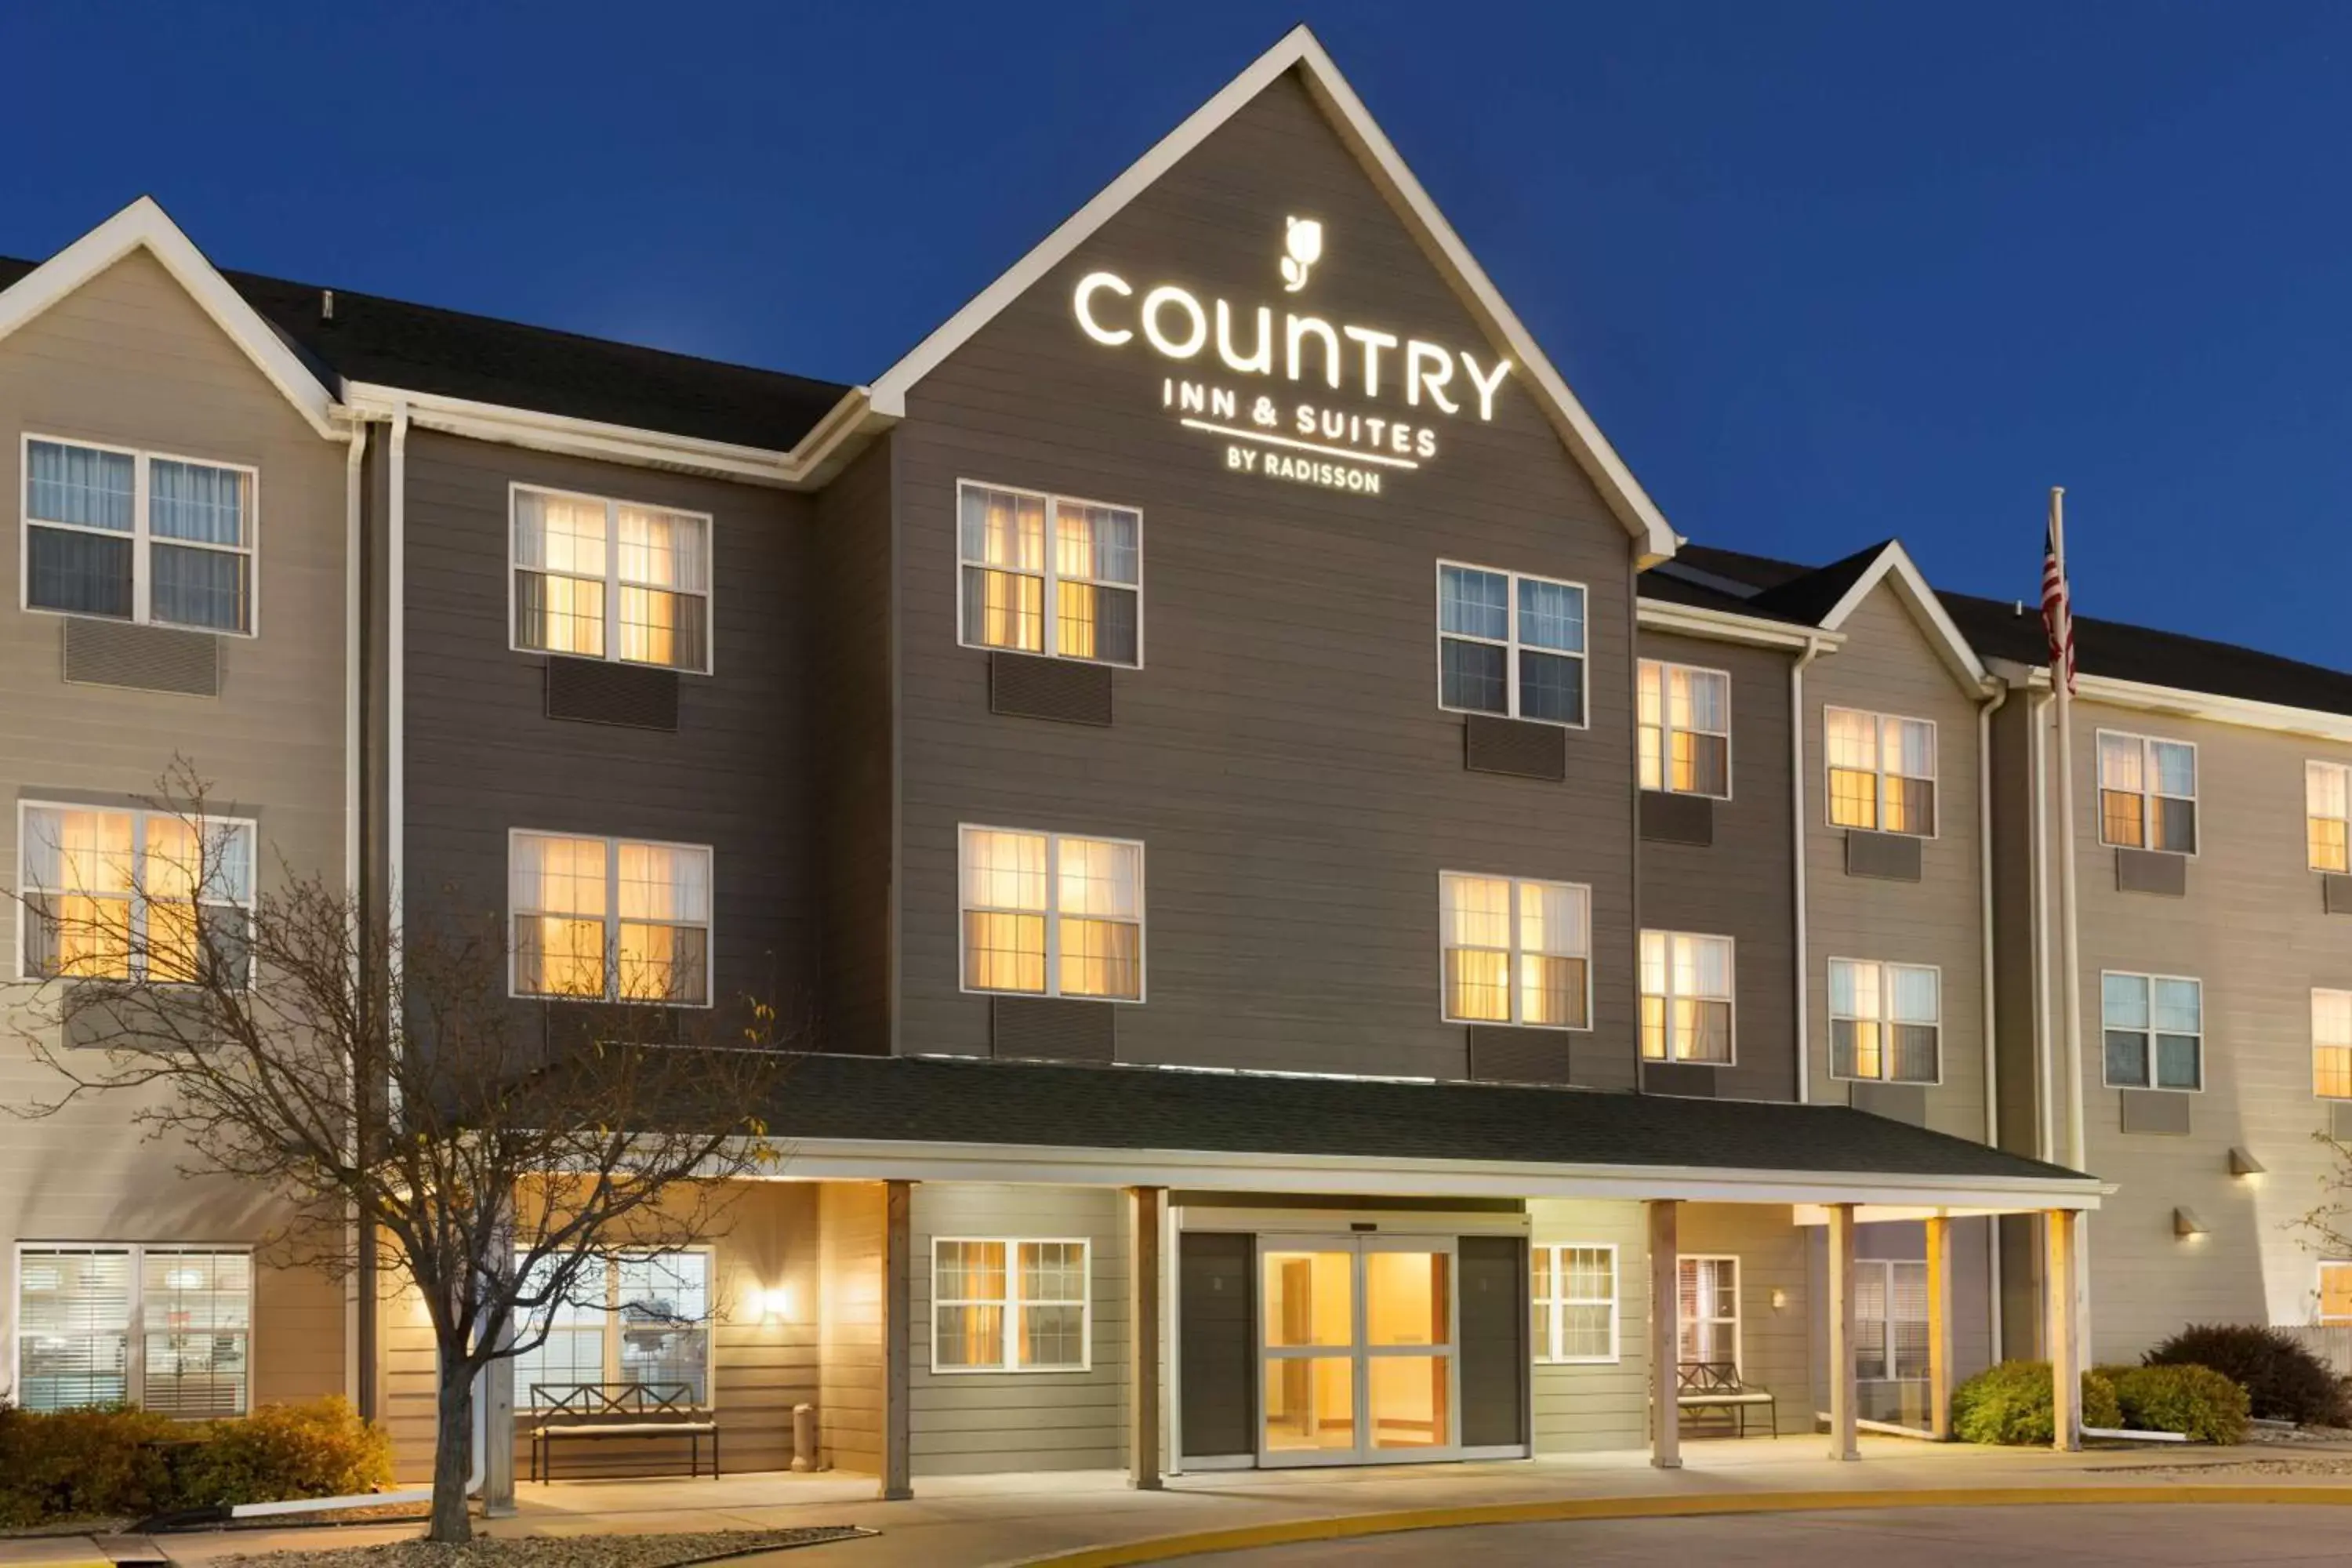 Property building in Country Inn & Suites by Radisson, Kearney, NE